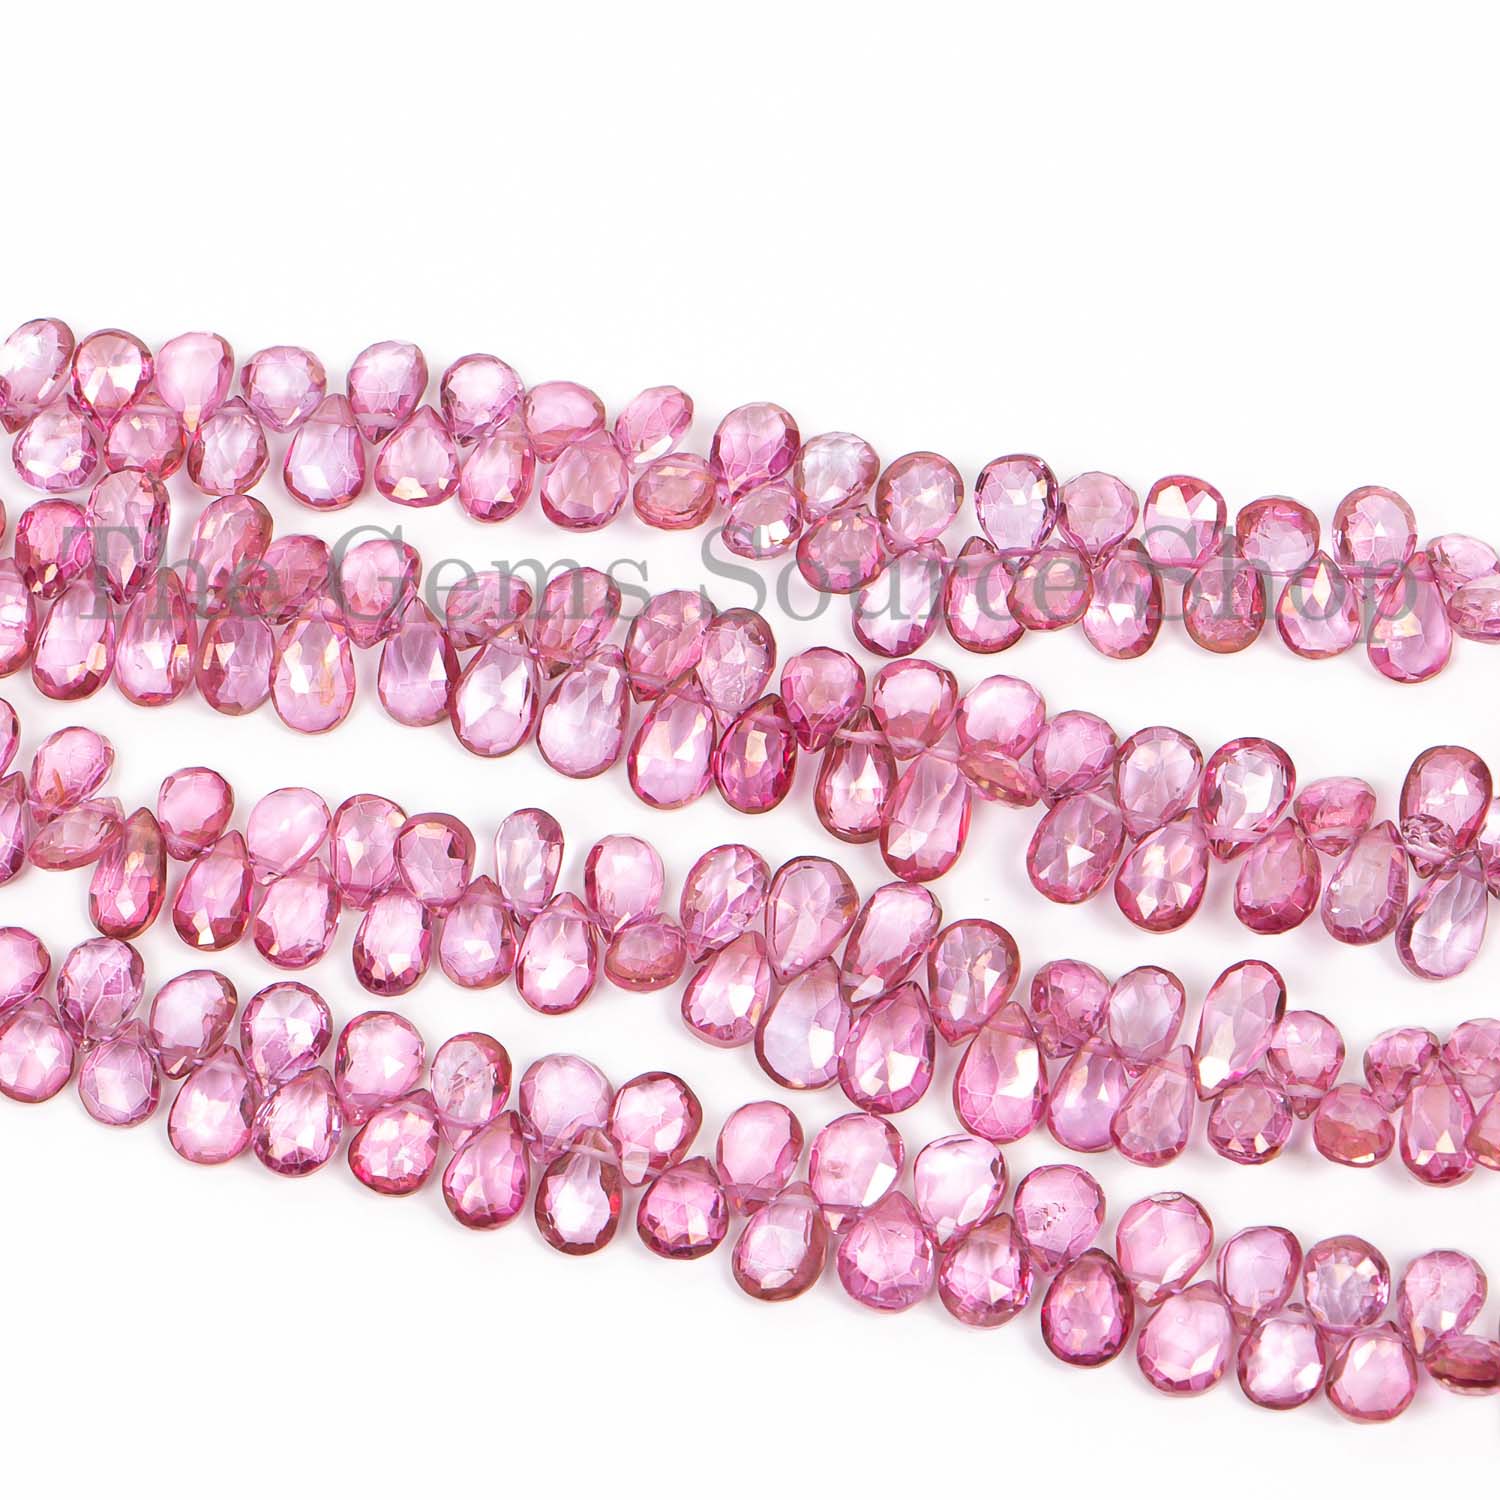 Pink Mystic Topaz Faceted Pear Briolette, Gemstone Beads